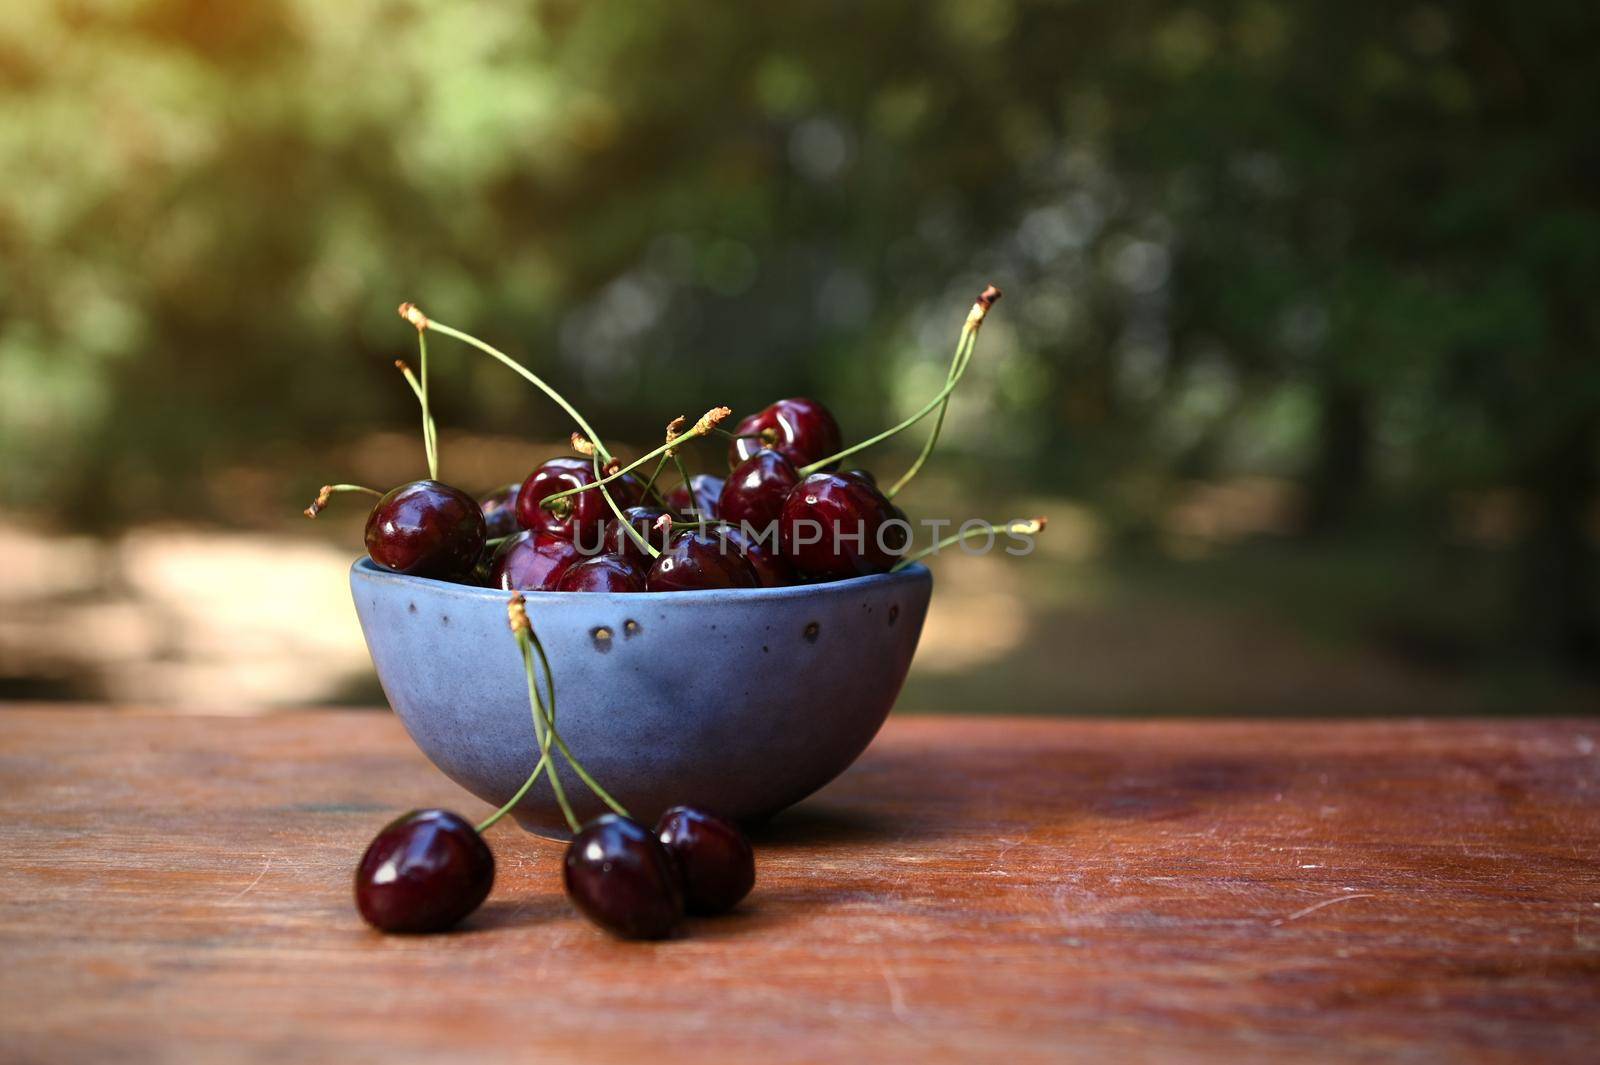 Still life composition of fresh ripe ready-to-eat purple cherries in a blue ceramic bowl on rustic wooden table against a countryside nature background. Copy ad space for advertising text